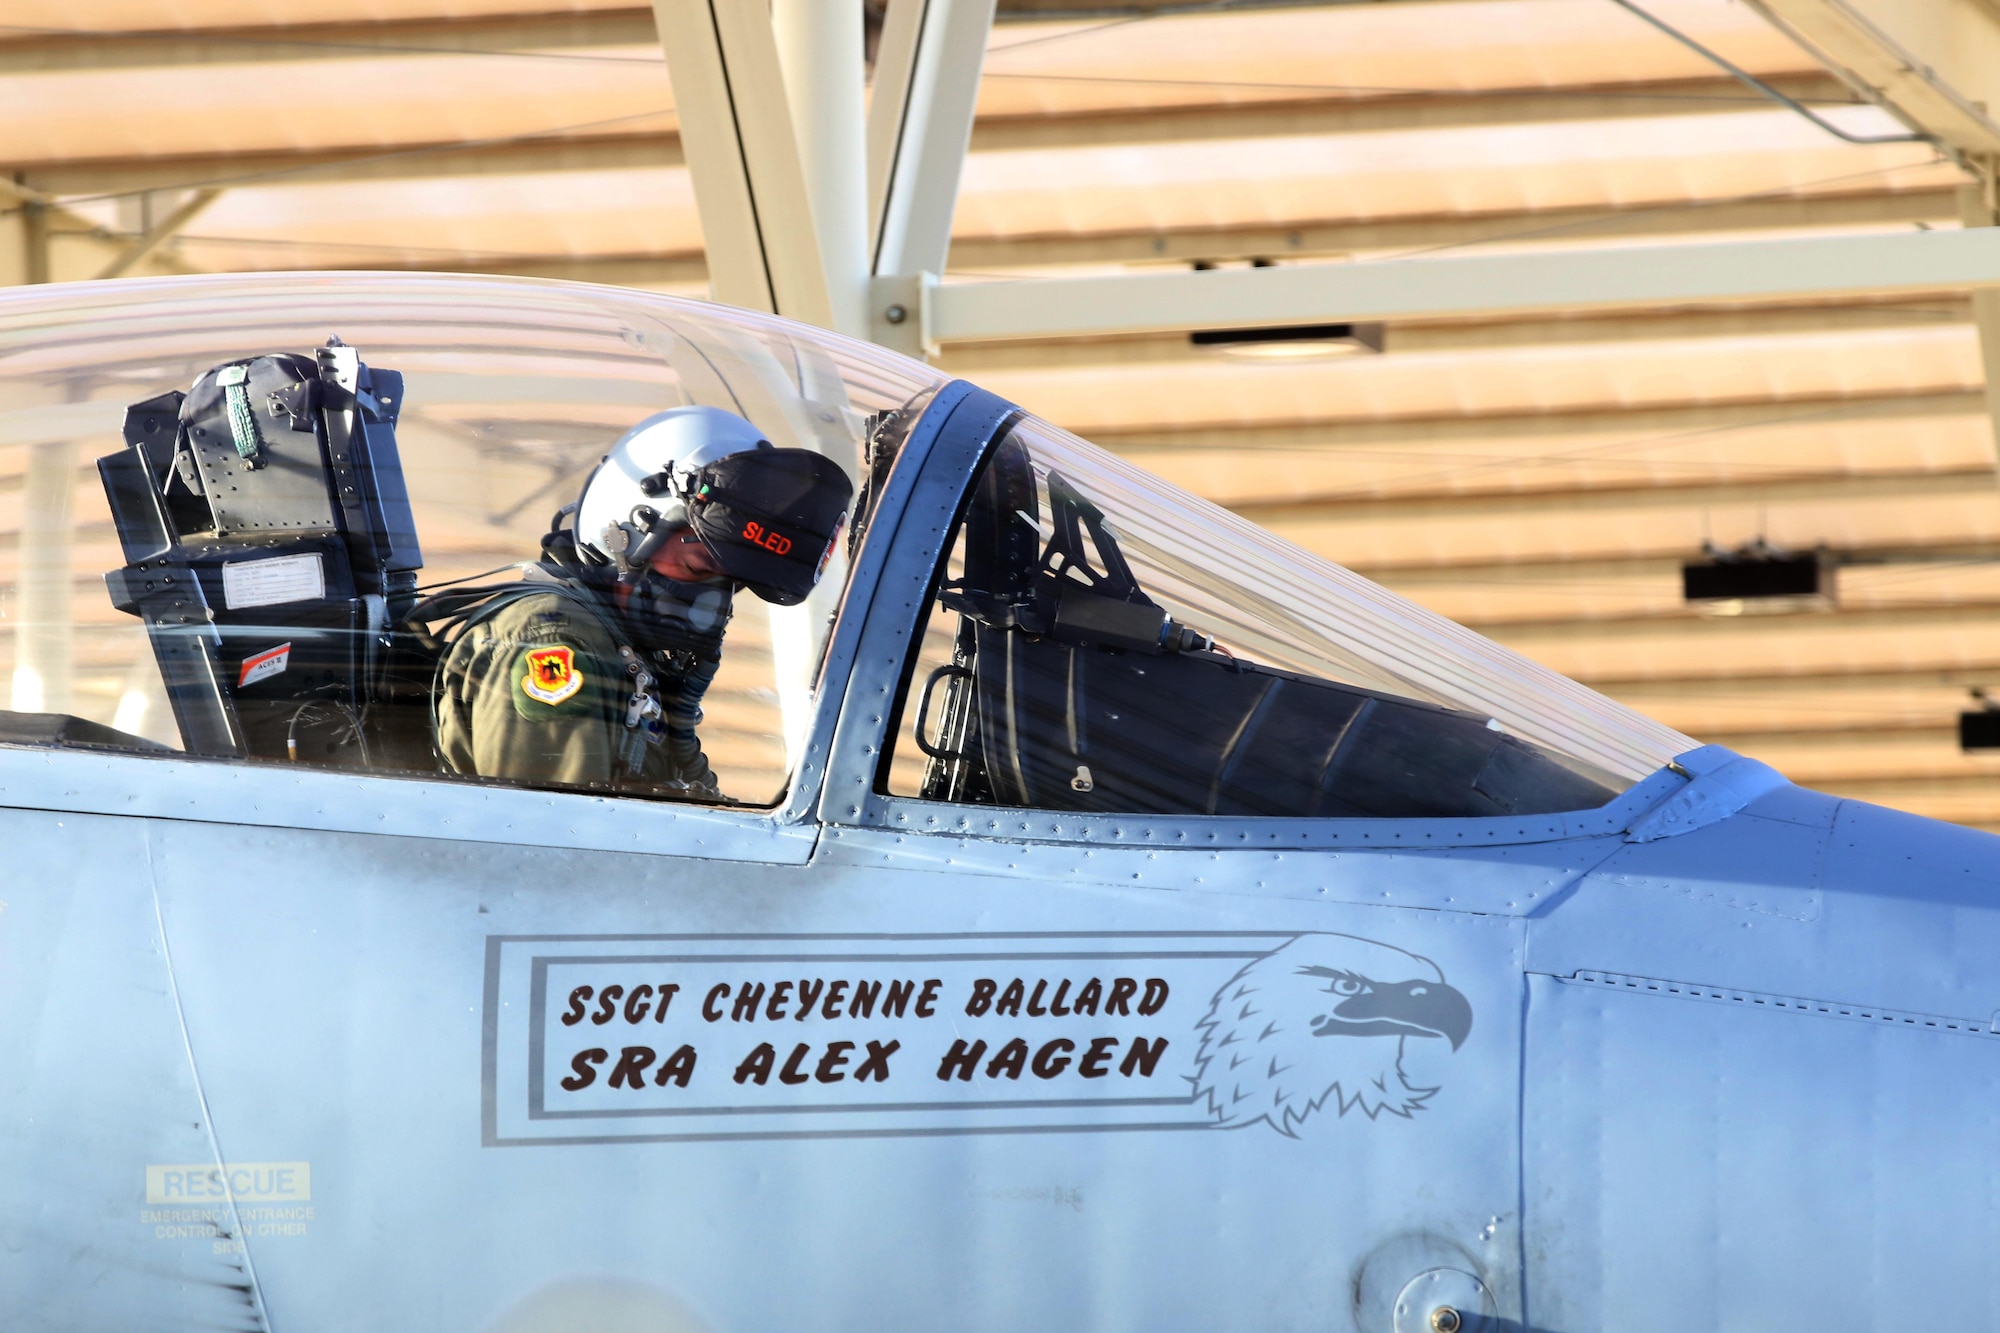 U.S. Air Force Colonel Jeff Smith, 173rd Fighter Wing Commander, preflights an F-15 Eagle in preperation for a training flight at Tucson, Arizona January 10, 2017.  The 173rd Fighter Wing spent two weeks training with the 162nd Wing, Airzona Air National Guard, flying dissimilar air combat training with their F-16s.  (U.S. Air National Guard photo by Master Sgt. Jennifer Shirar)